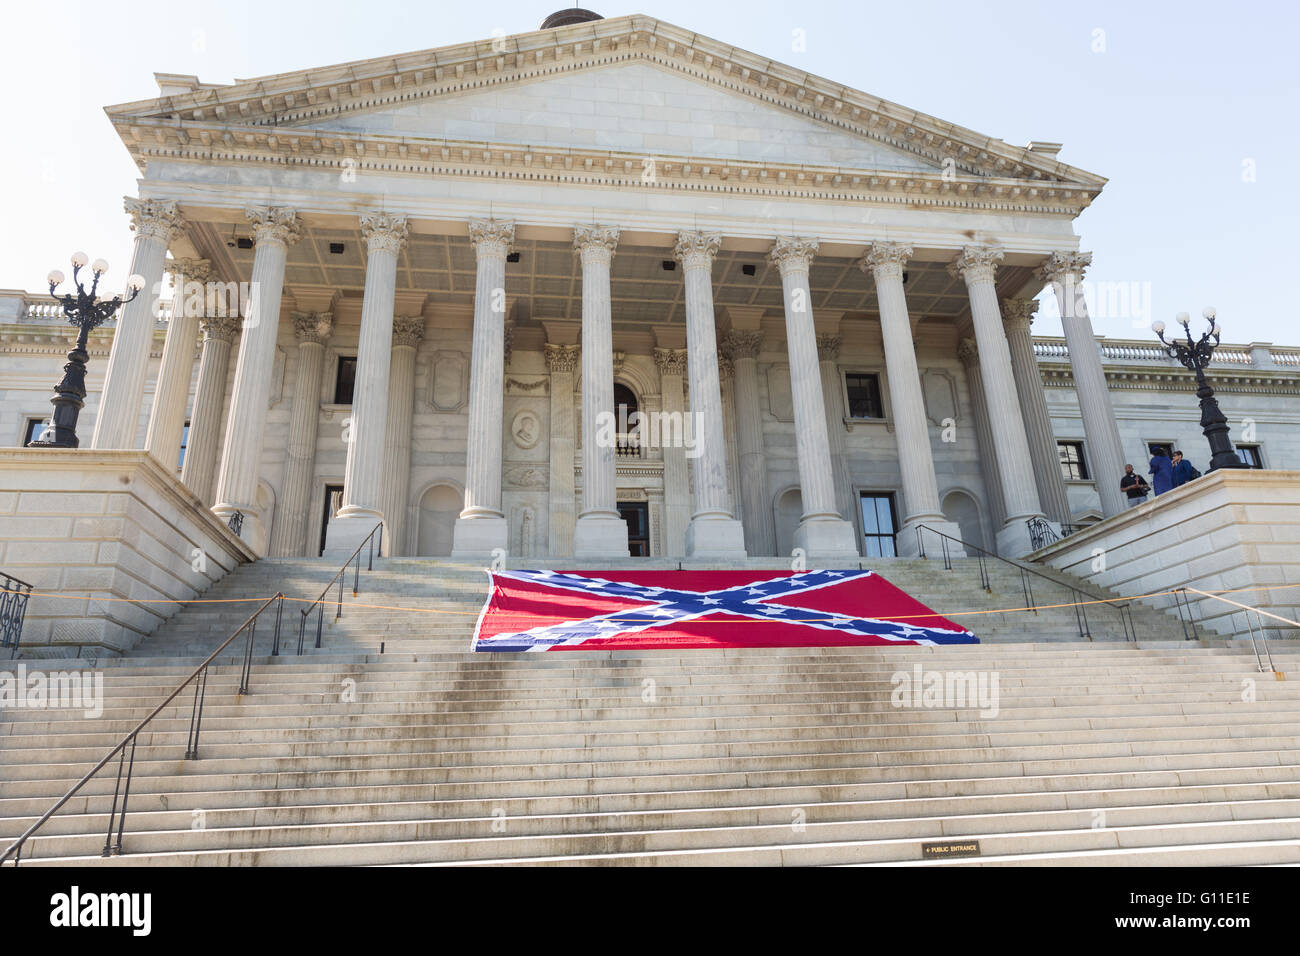 Columbia, South Carolina, USA. 07th May, 2016. A giant Confederate Battle flag on the steps of the State House to mark Confederate Memorial Day May 7, 2016 in Columbia, South Carolina. The events marking southern Confederate heritage come nearly a year after the removal of the confederate flag from the capitol following the murder of nine people at the historic black Mother Emanuel AME Church. Credit:  Planetpix/Alamy Live News Stock Photo